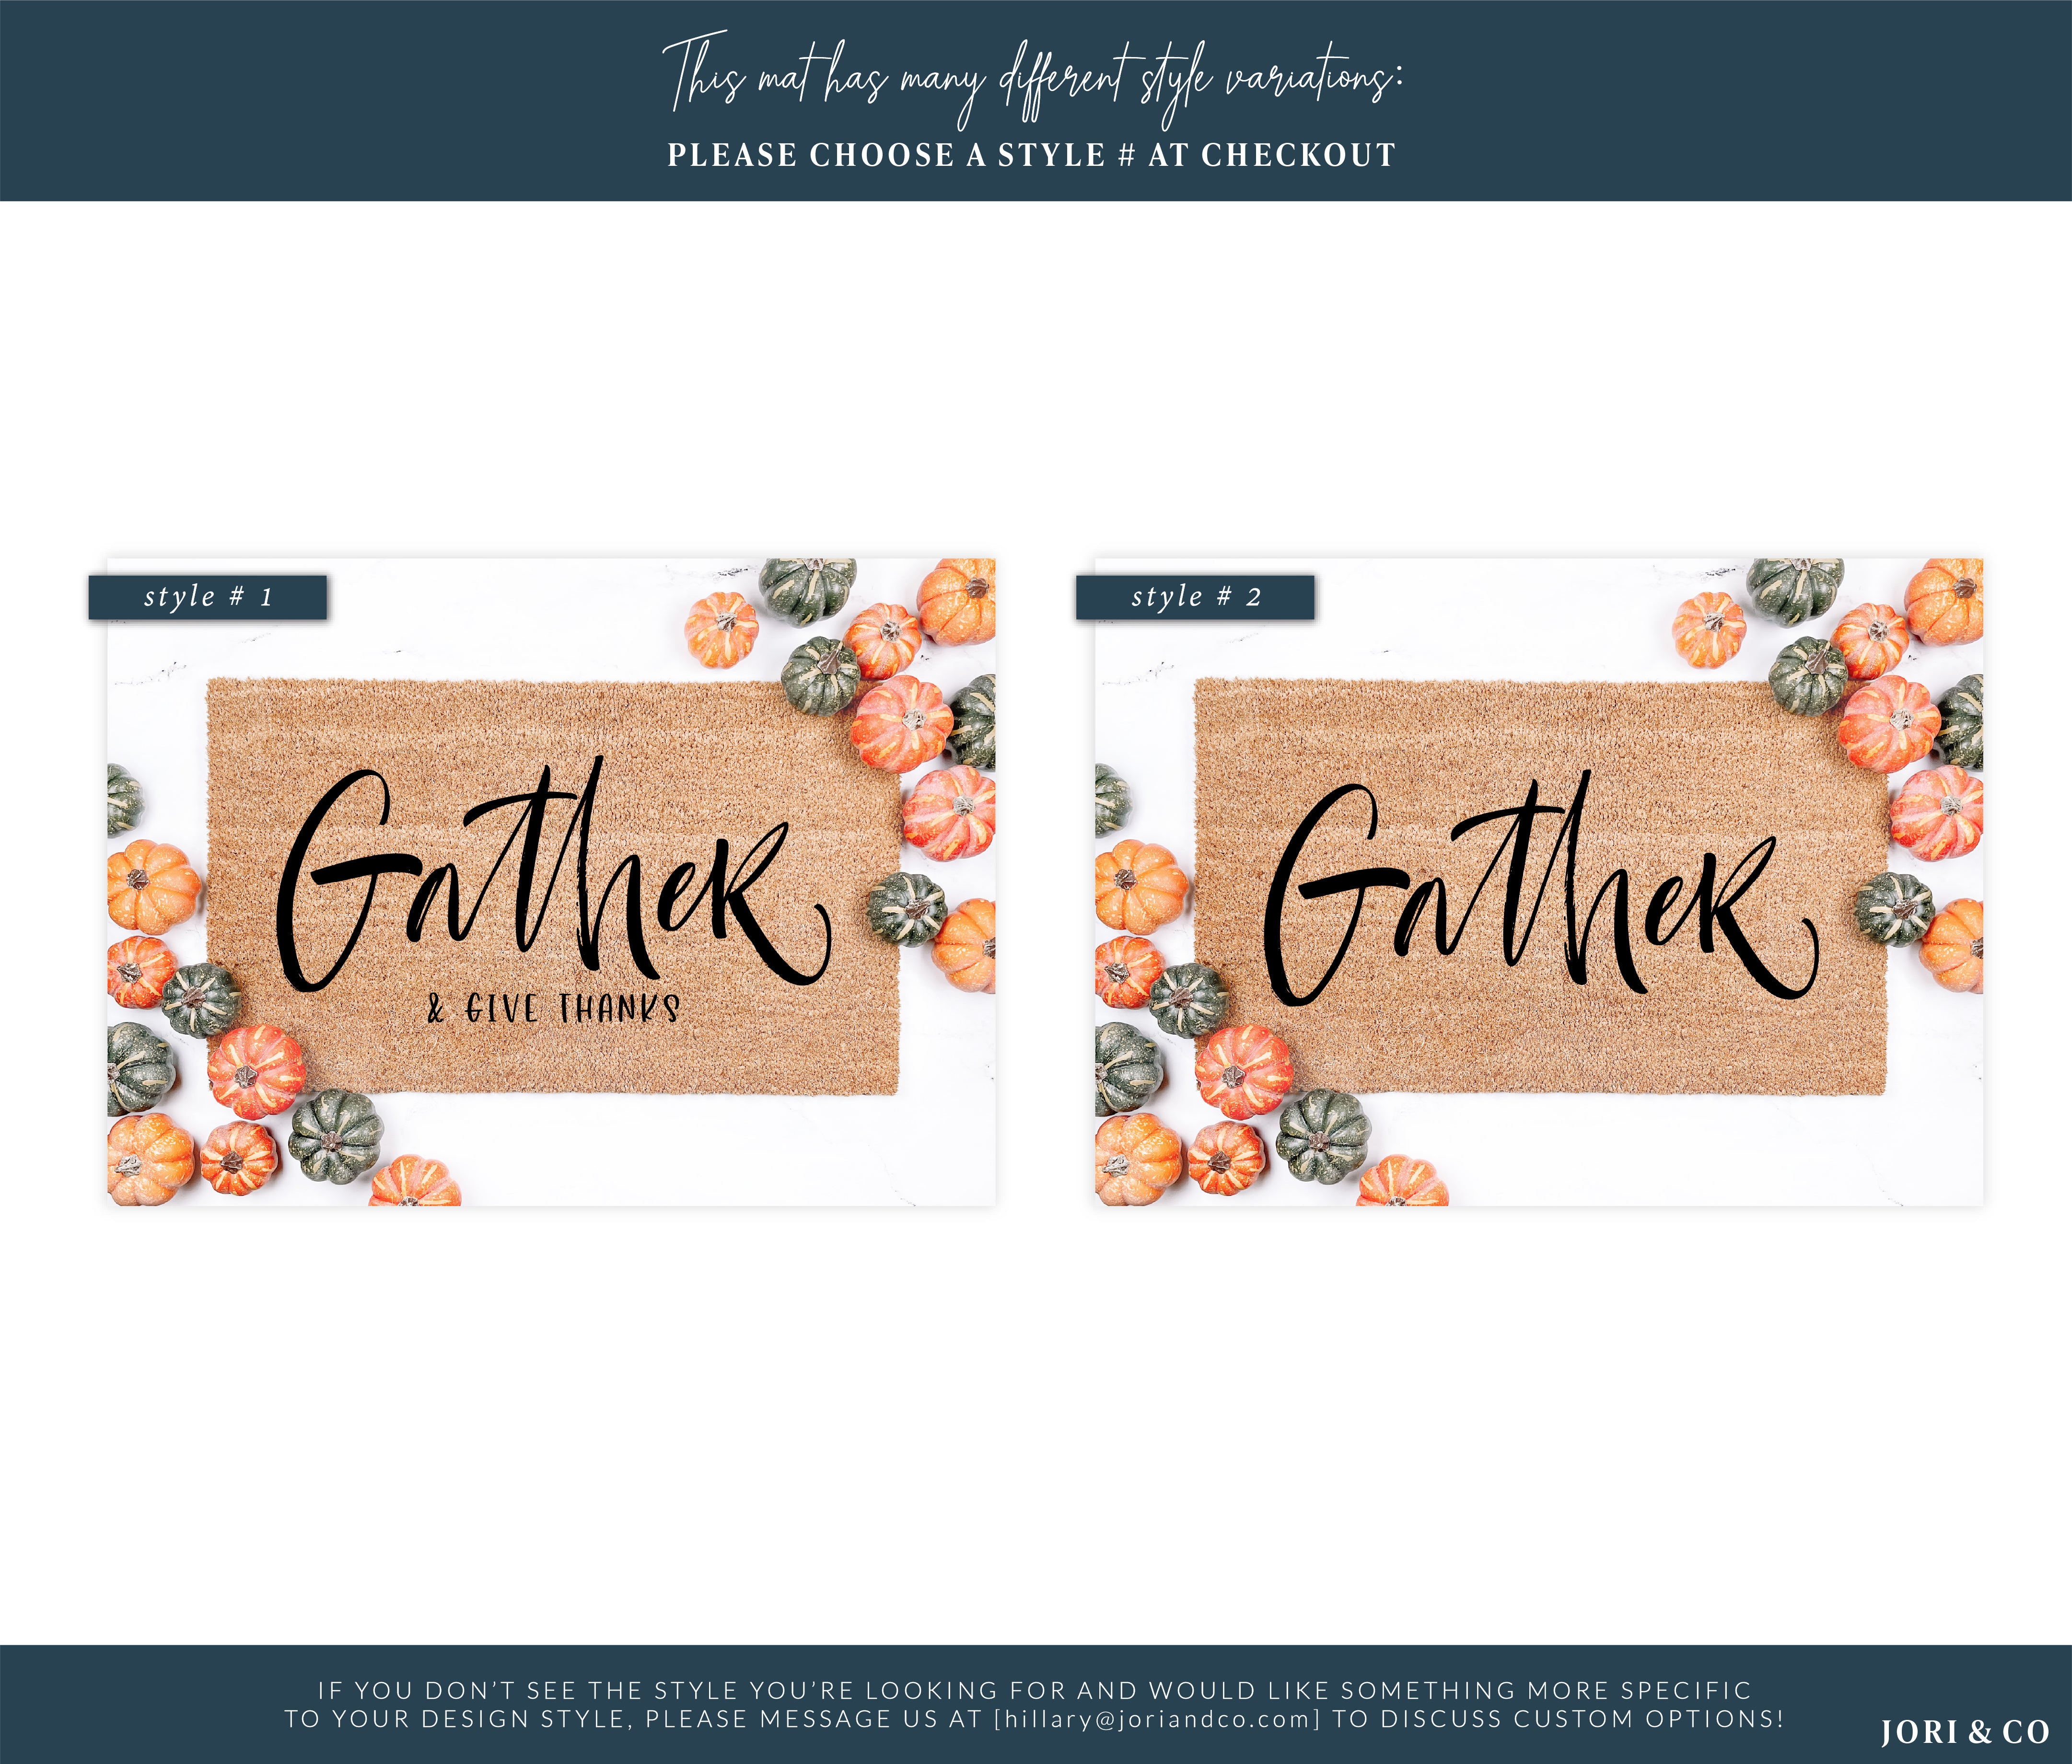 Gather & Give Thanks Thanksgiving Doormat